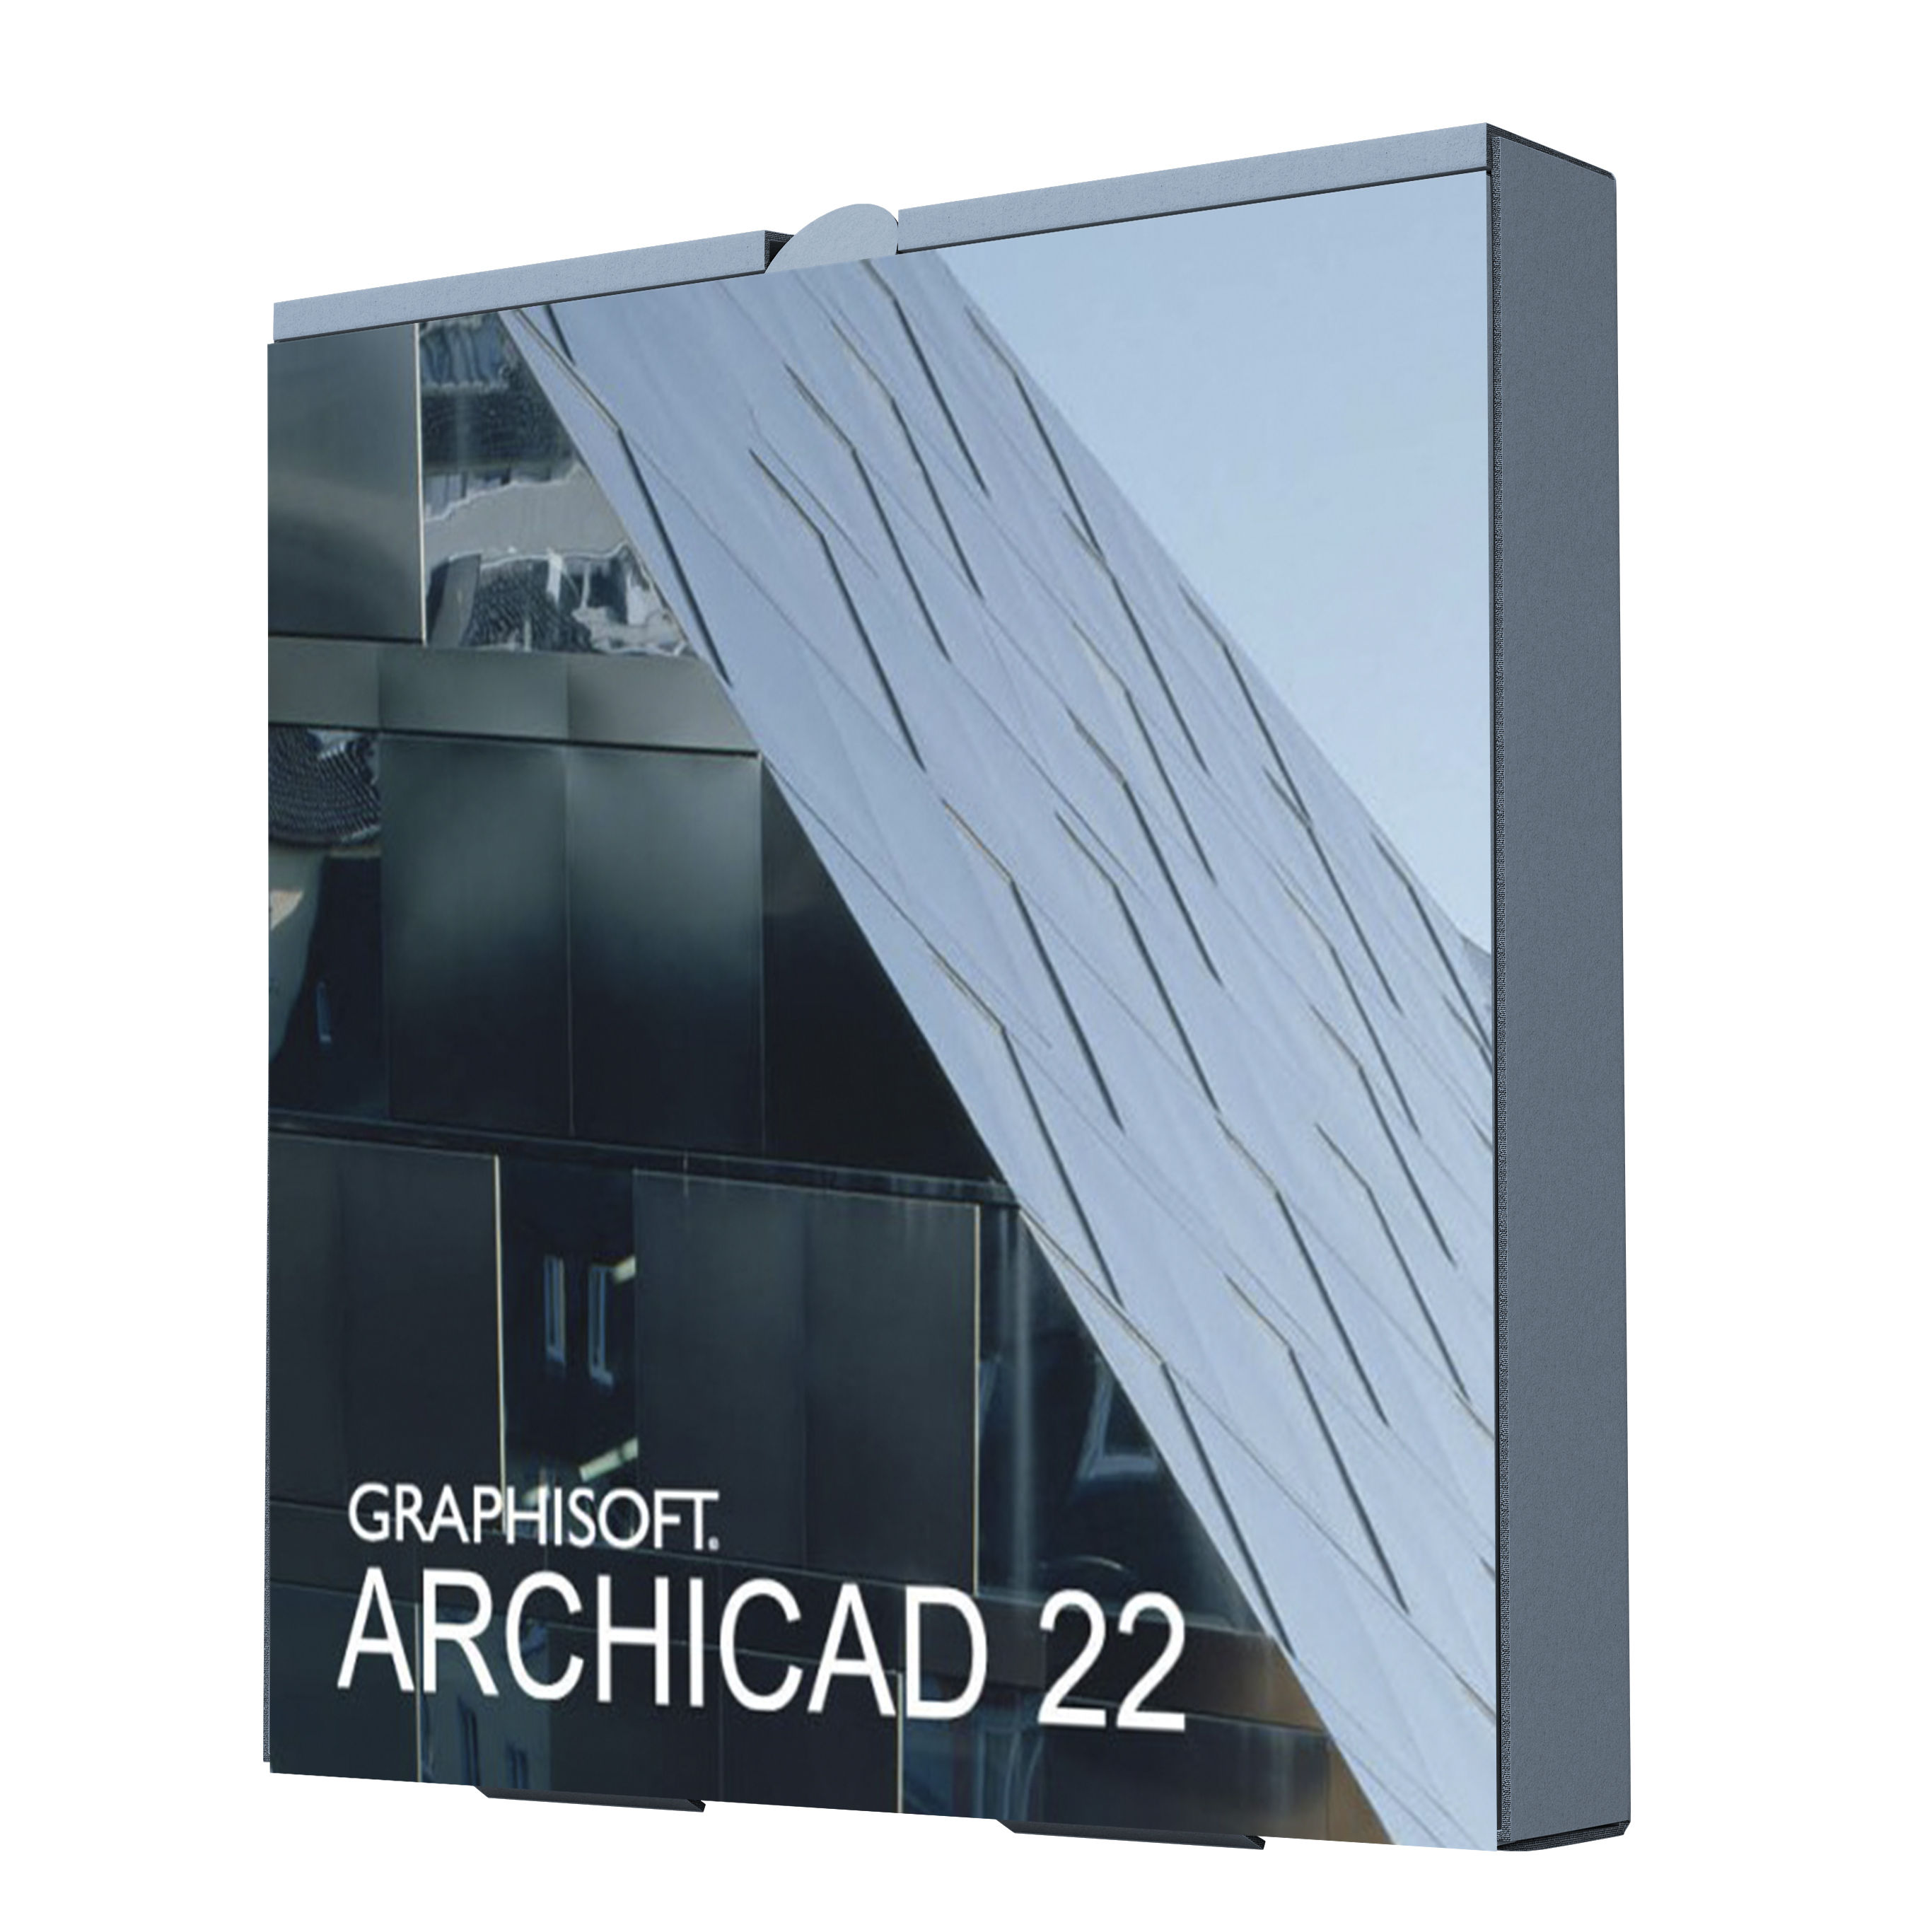 download cadimage for archicad 22